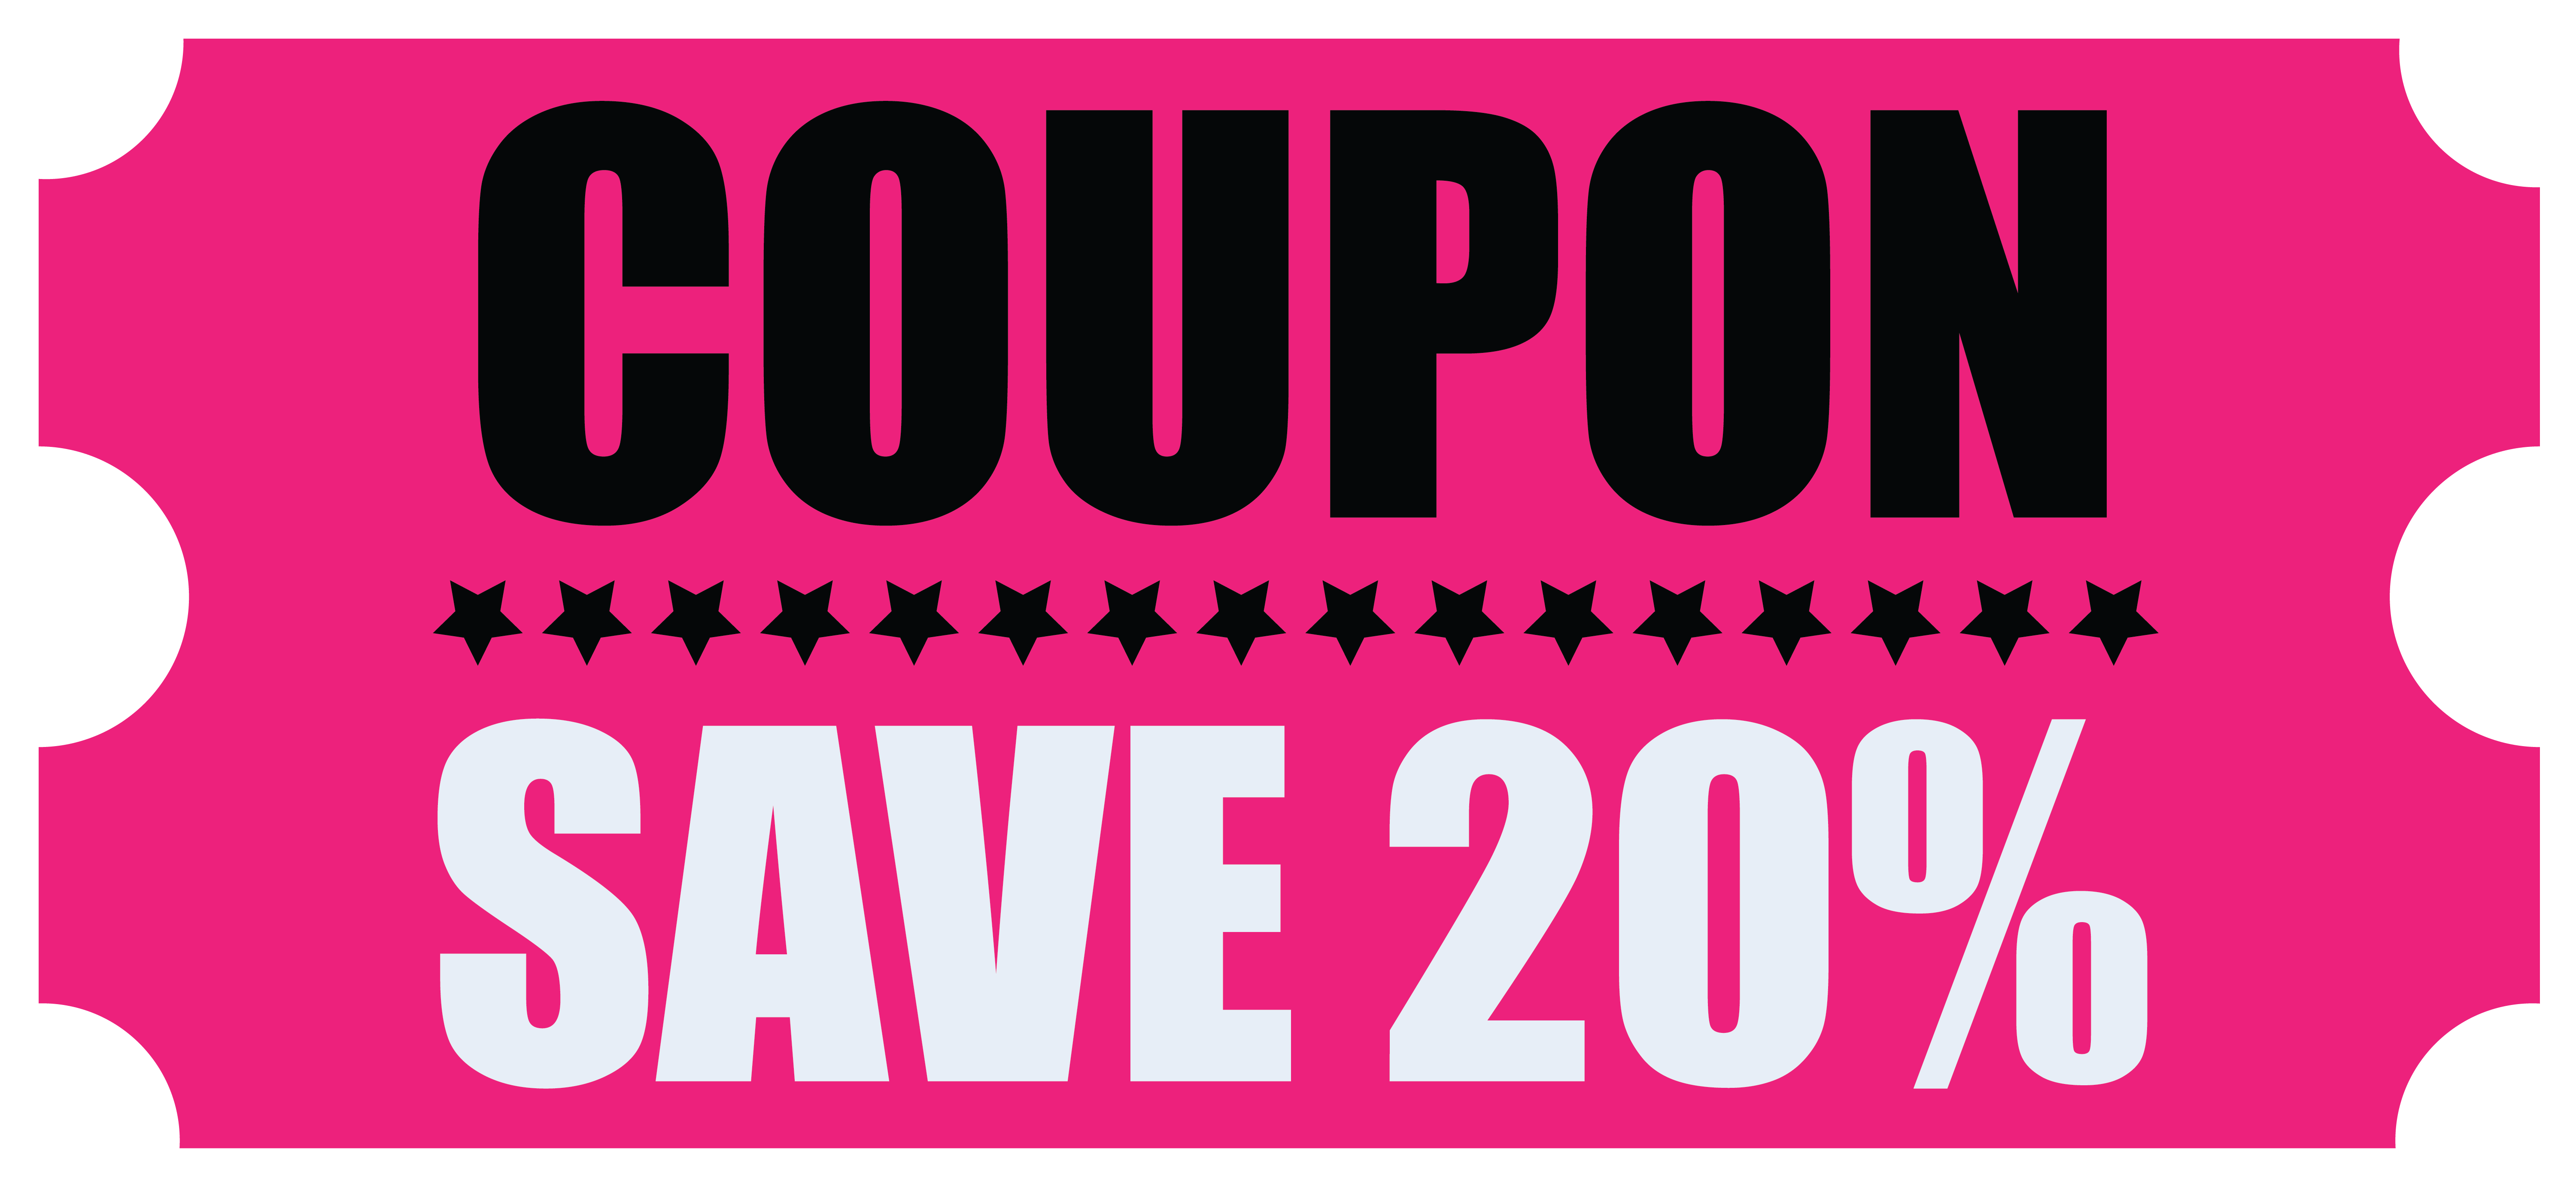 5. Aeropostale Coupons: 25% Off Coupon Code, Promo Codes 2021 - wide 6